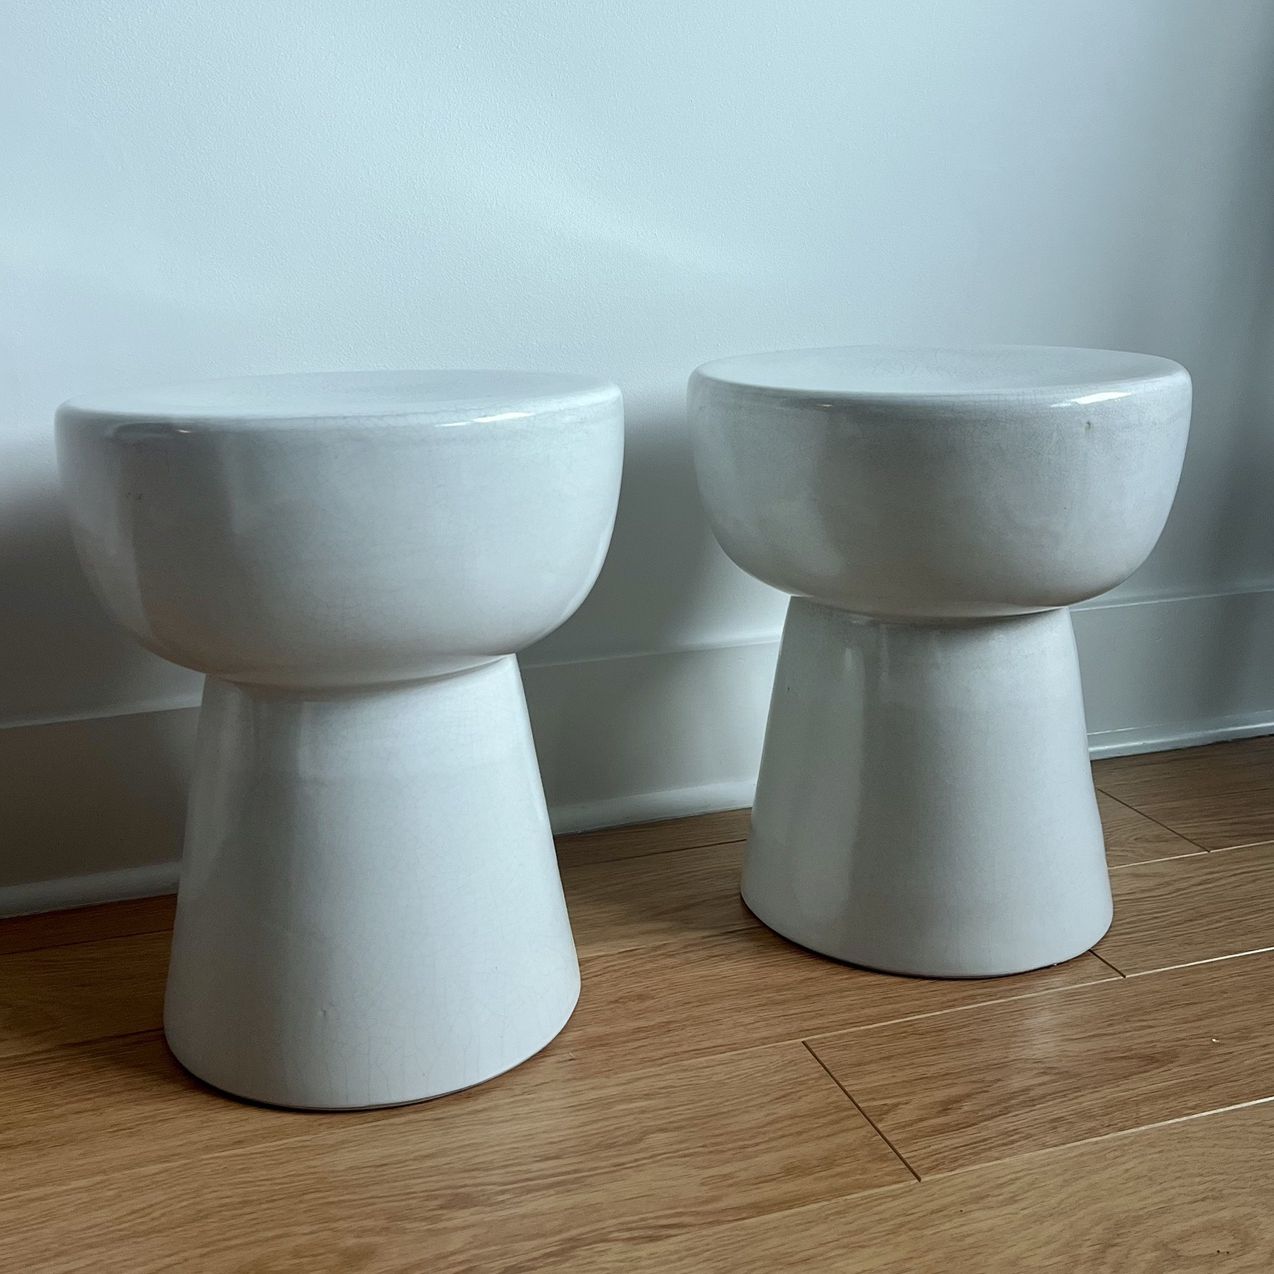 Pair Of White Ceramic Crackle Finish Stools / Side Tables